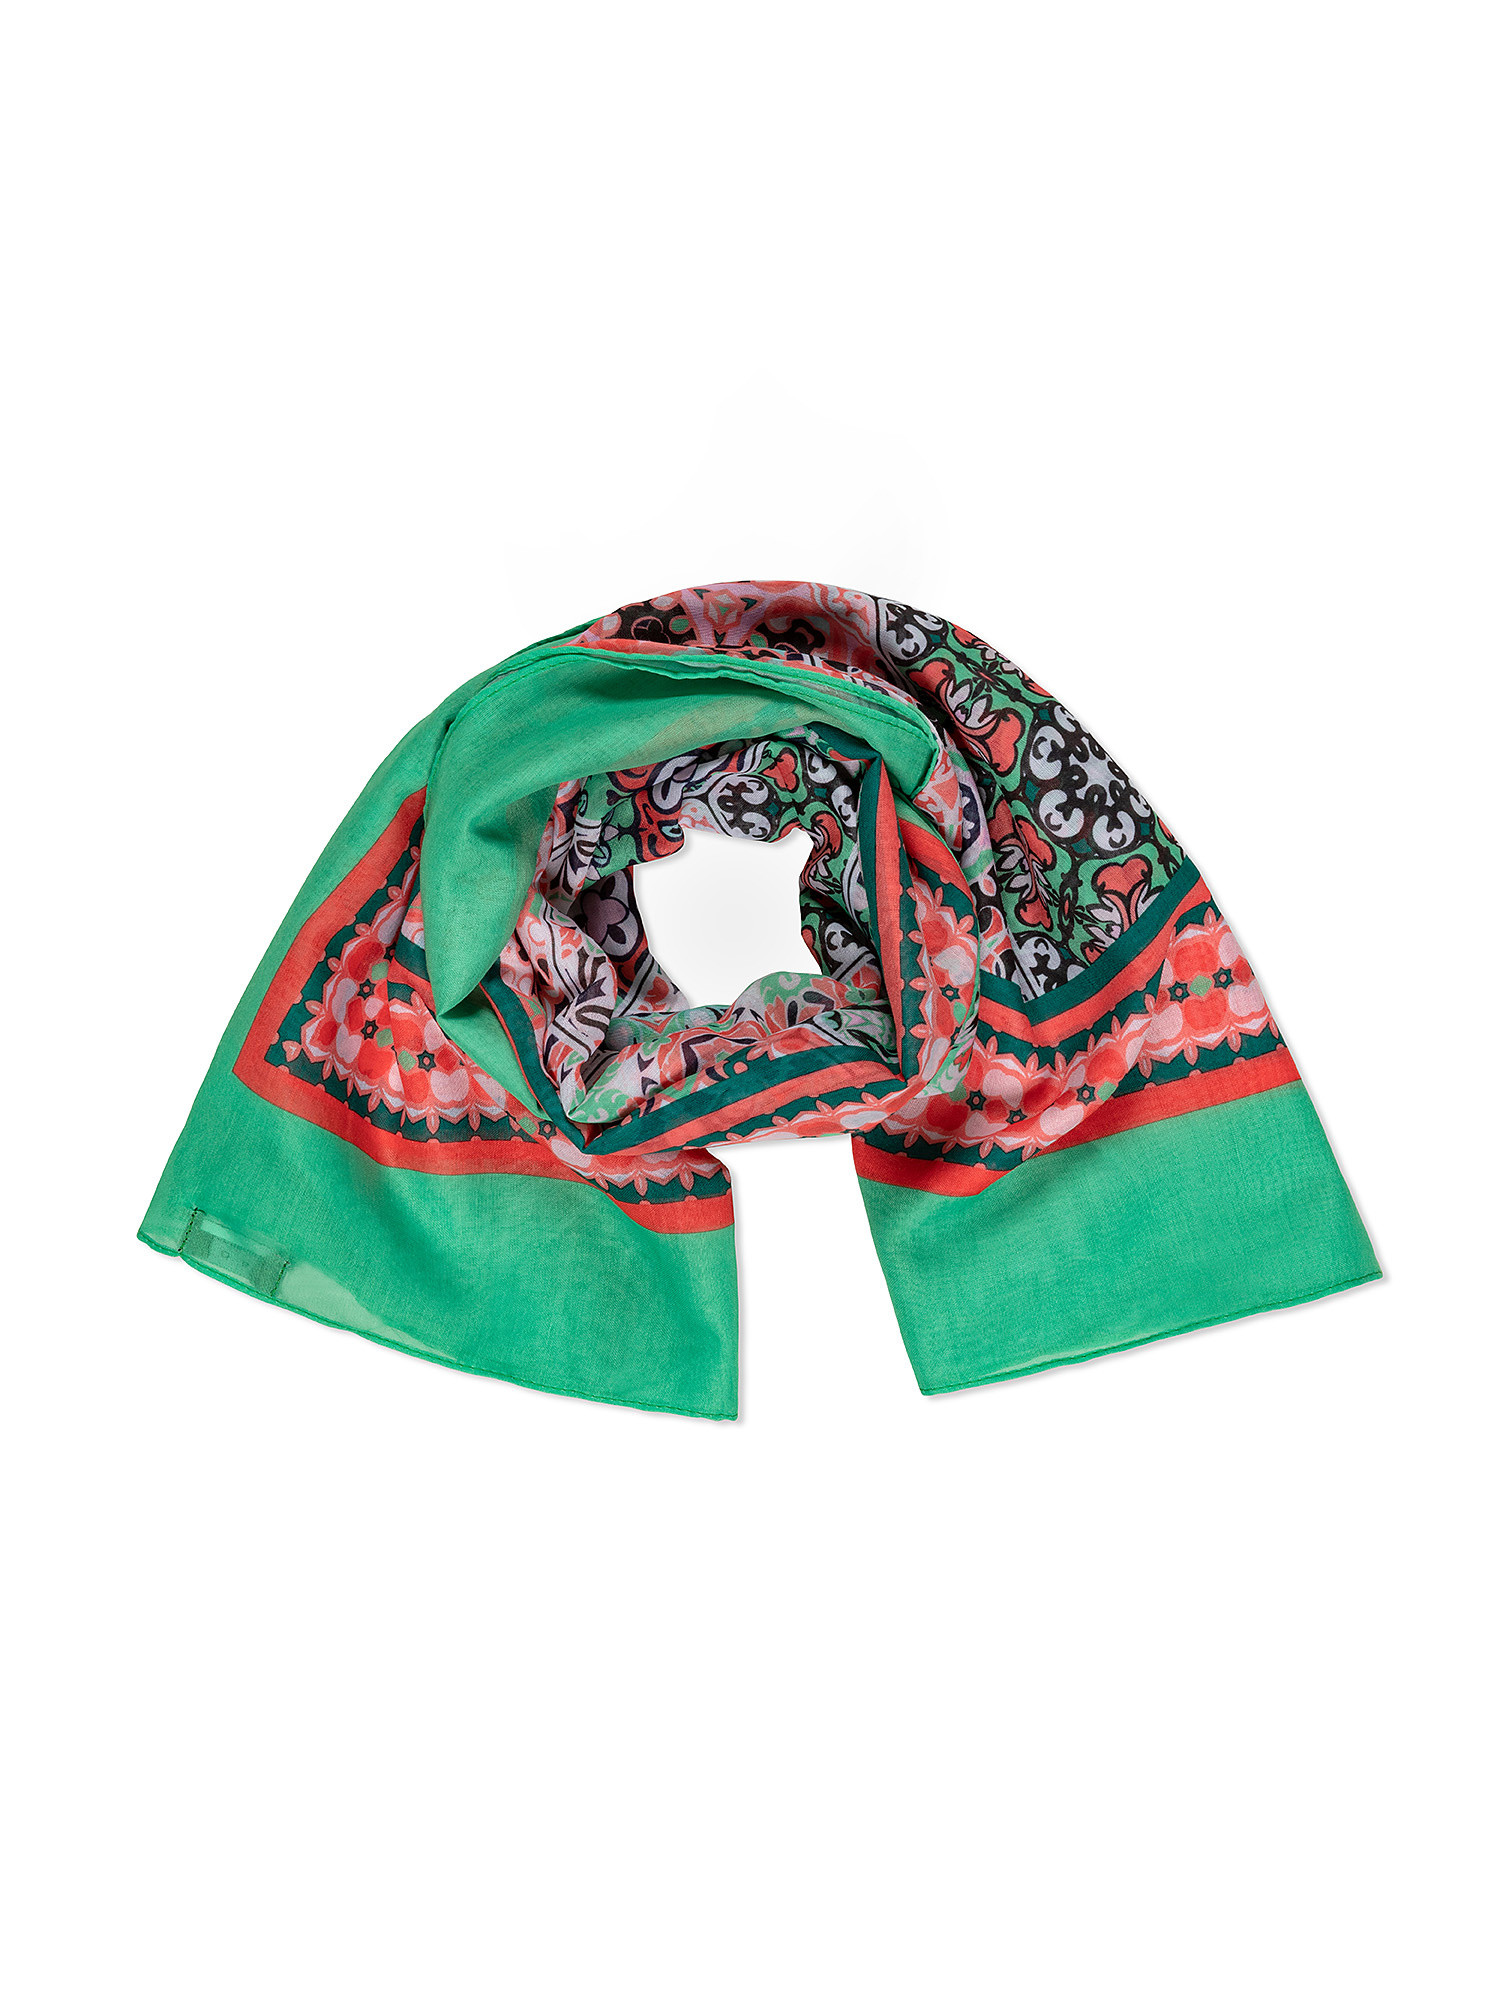 Koan - Scarf with print, Green, large image number 0